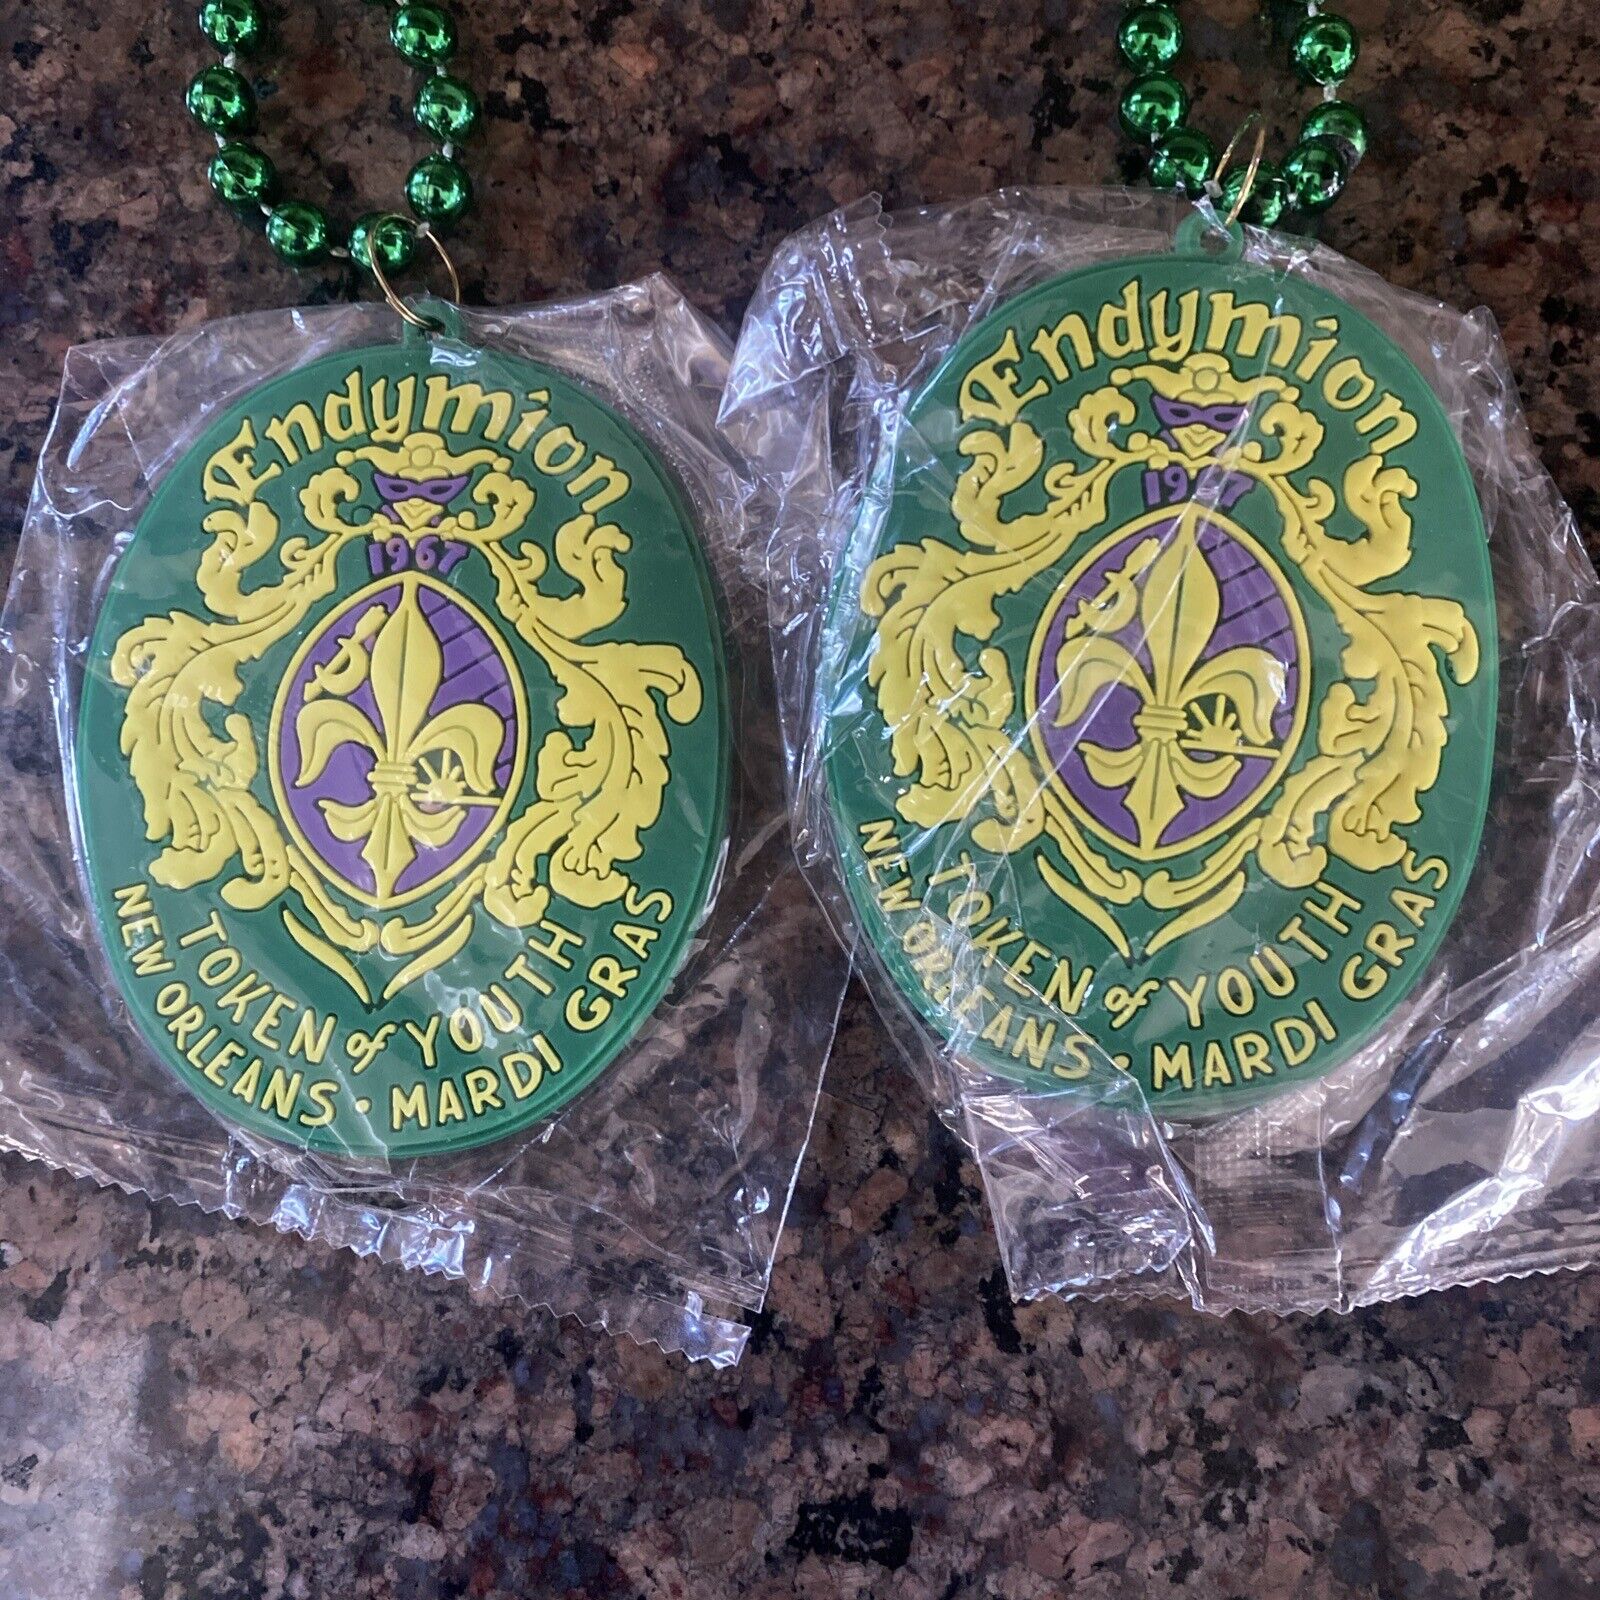 SET OF 2 KREWE OF ENDYMION OFFICIAL MEDALLION BEADS NEW ORLEANS MARDI GRAS